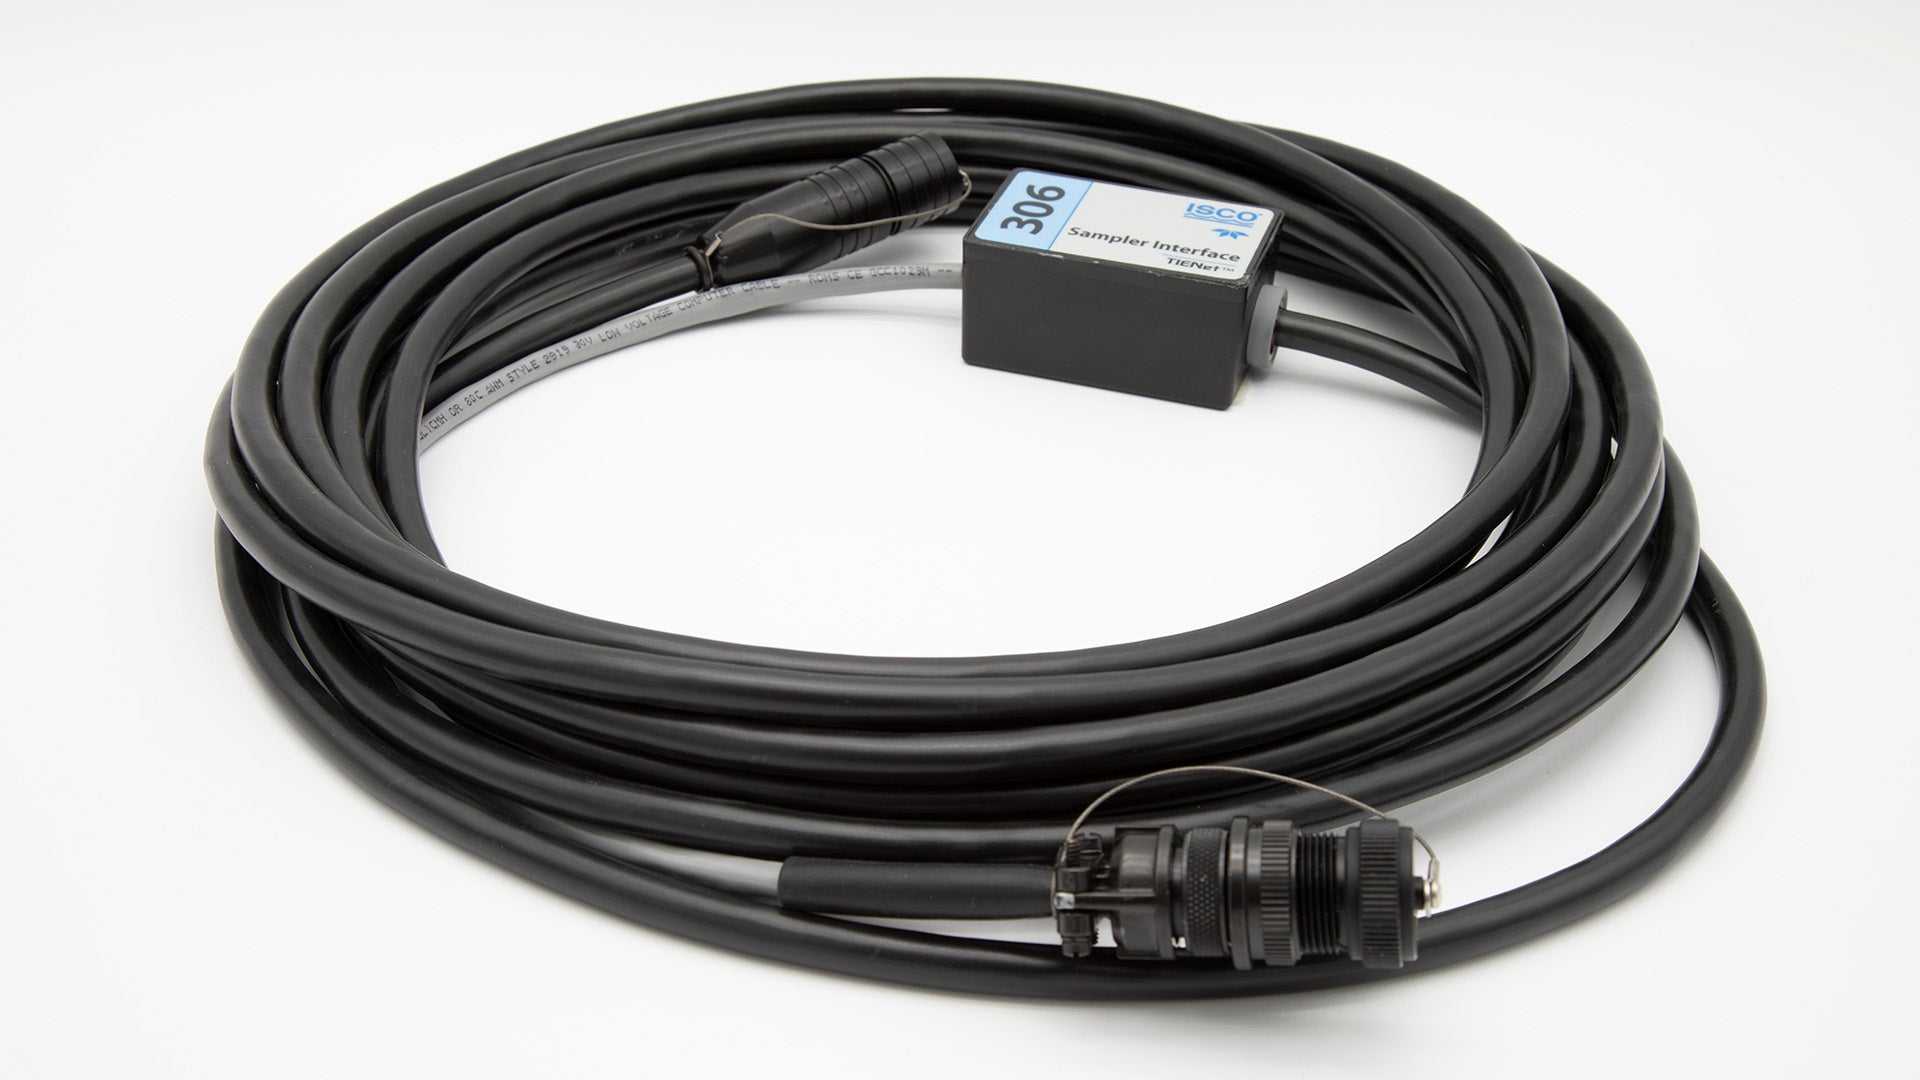 Cable with interface bx and connectors on both ends